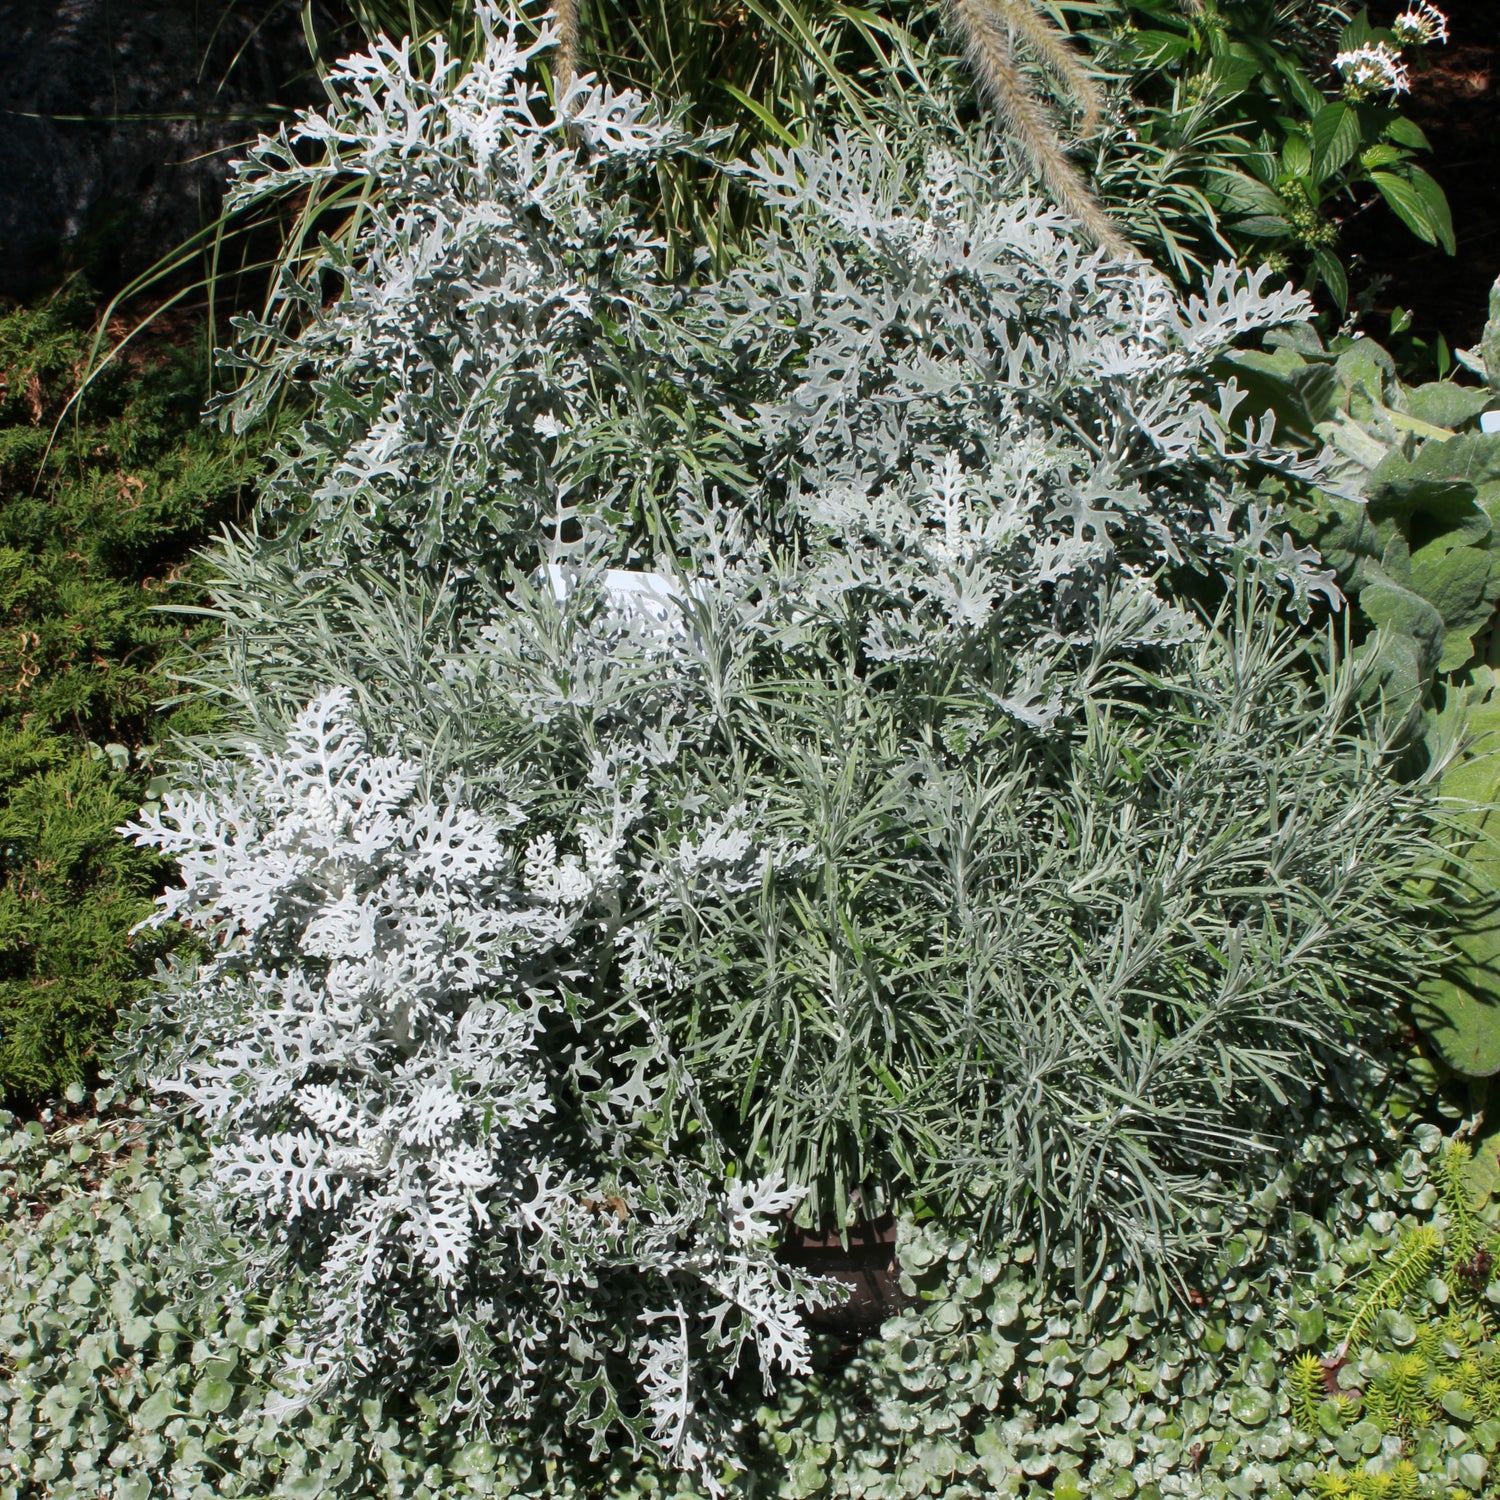 Silver Brocade artemisia planted with helichrysum for a medly of silvery foliage.